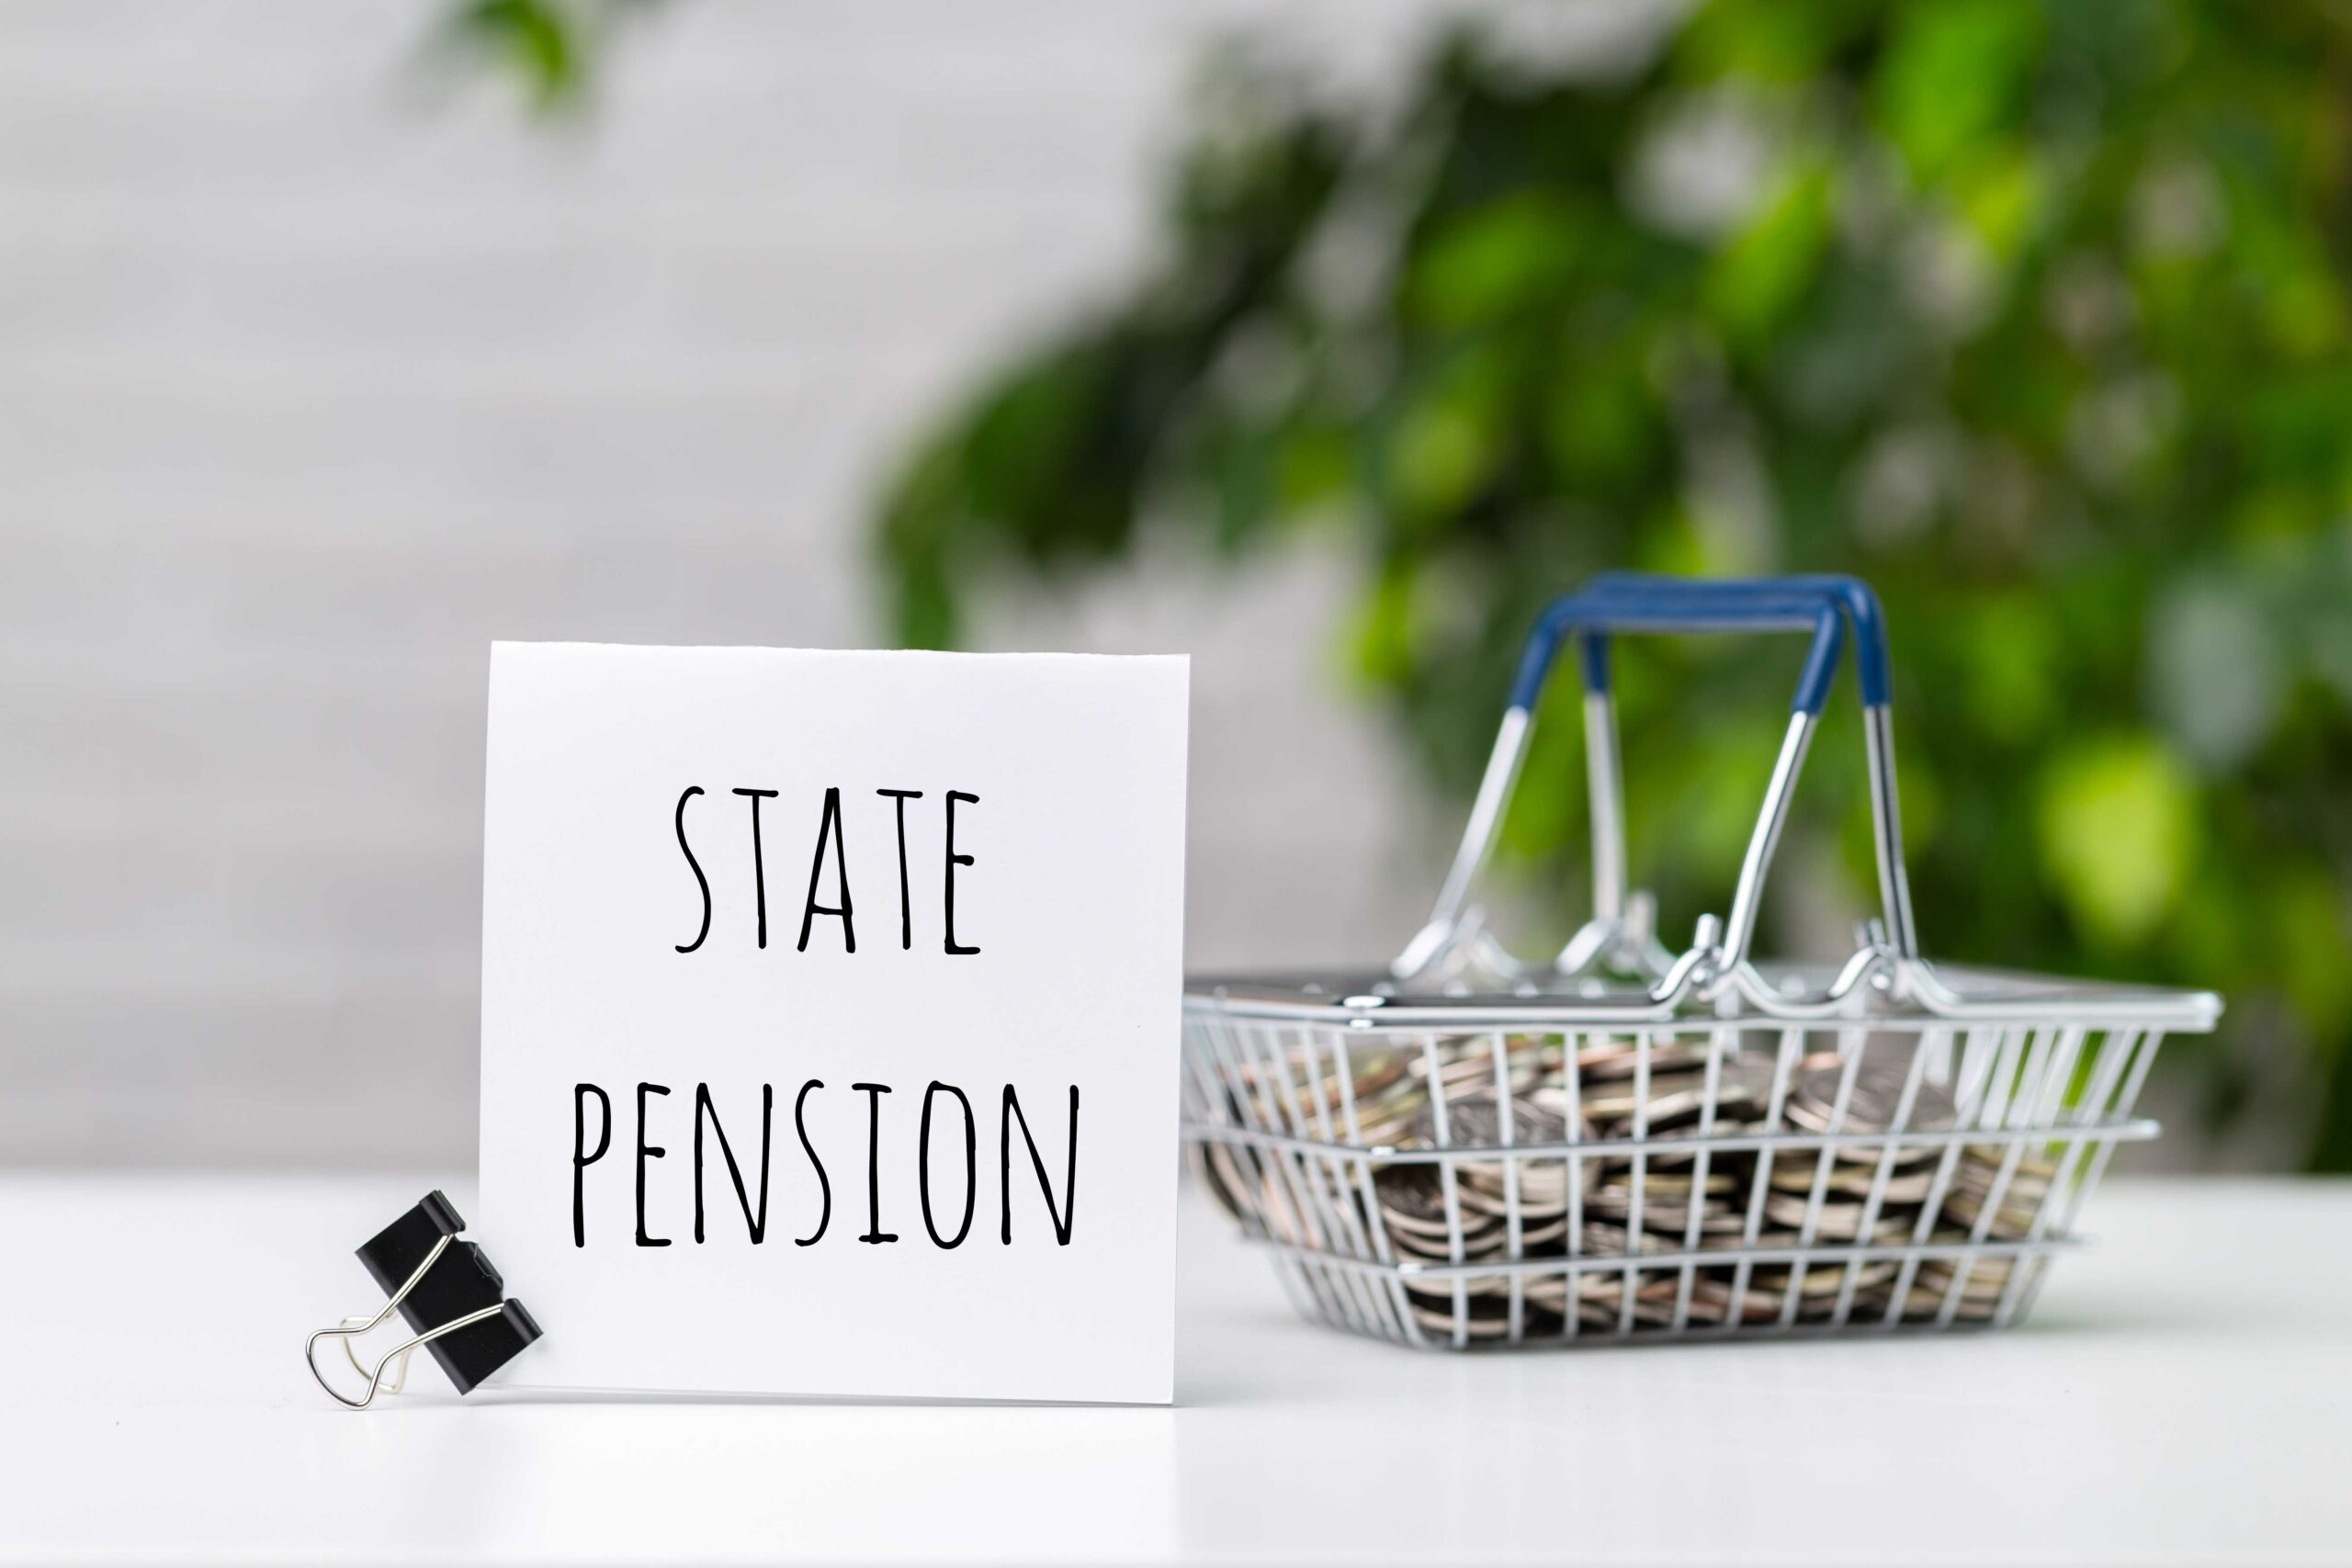 The future of the State pension